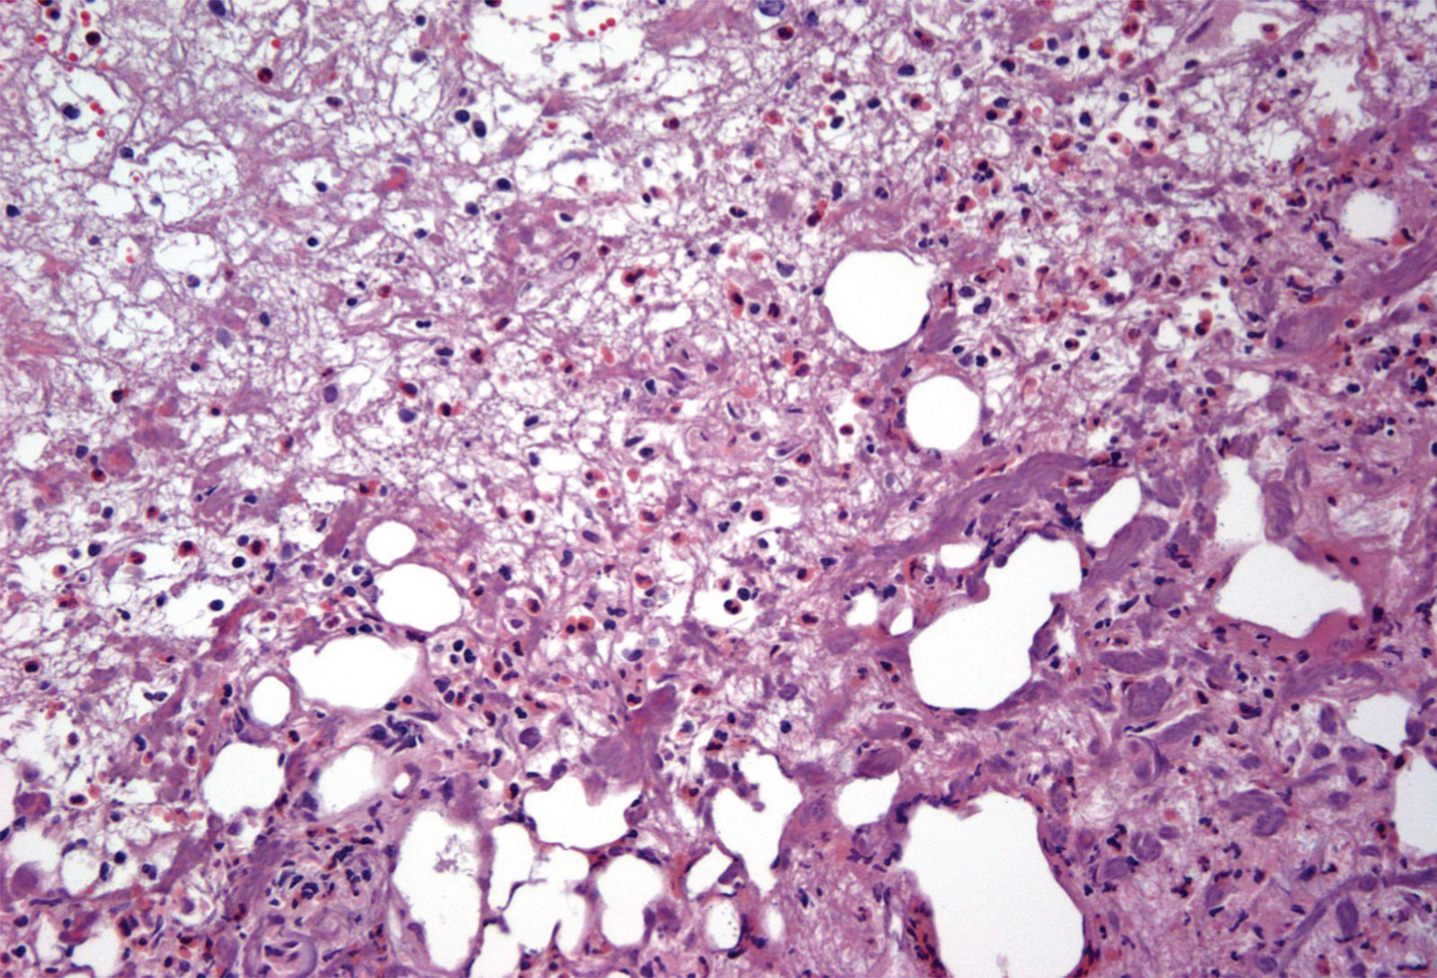 Bladder biopsy of Mitomycin-C cystitis. Biopsy demonstrates numerous eosinophils consistent with MMC induced cystitis.